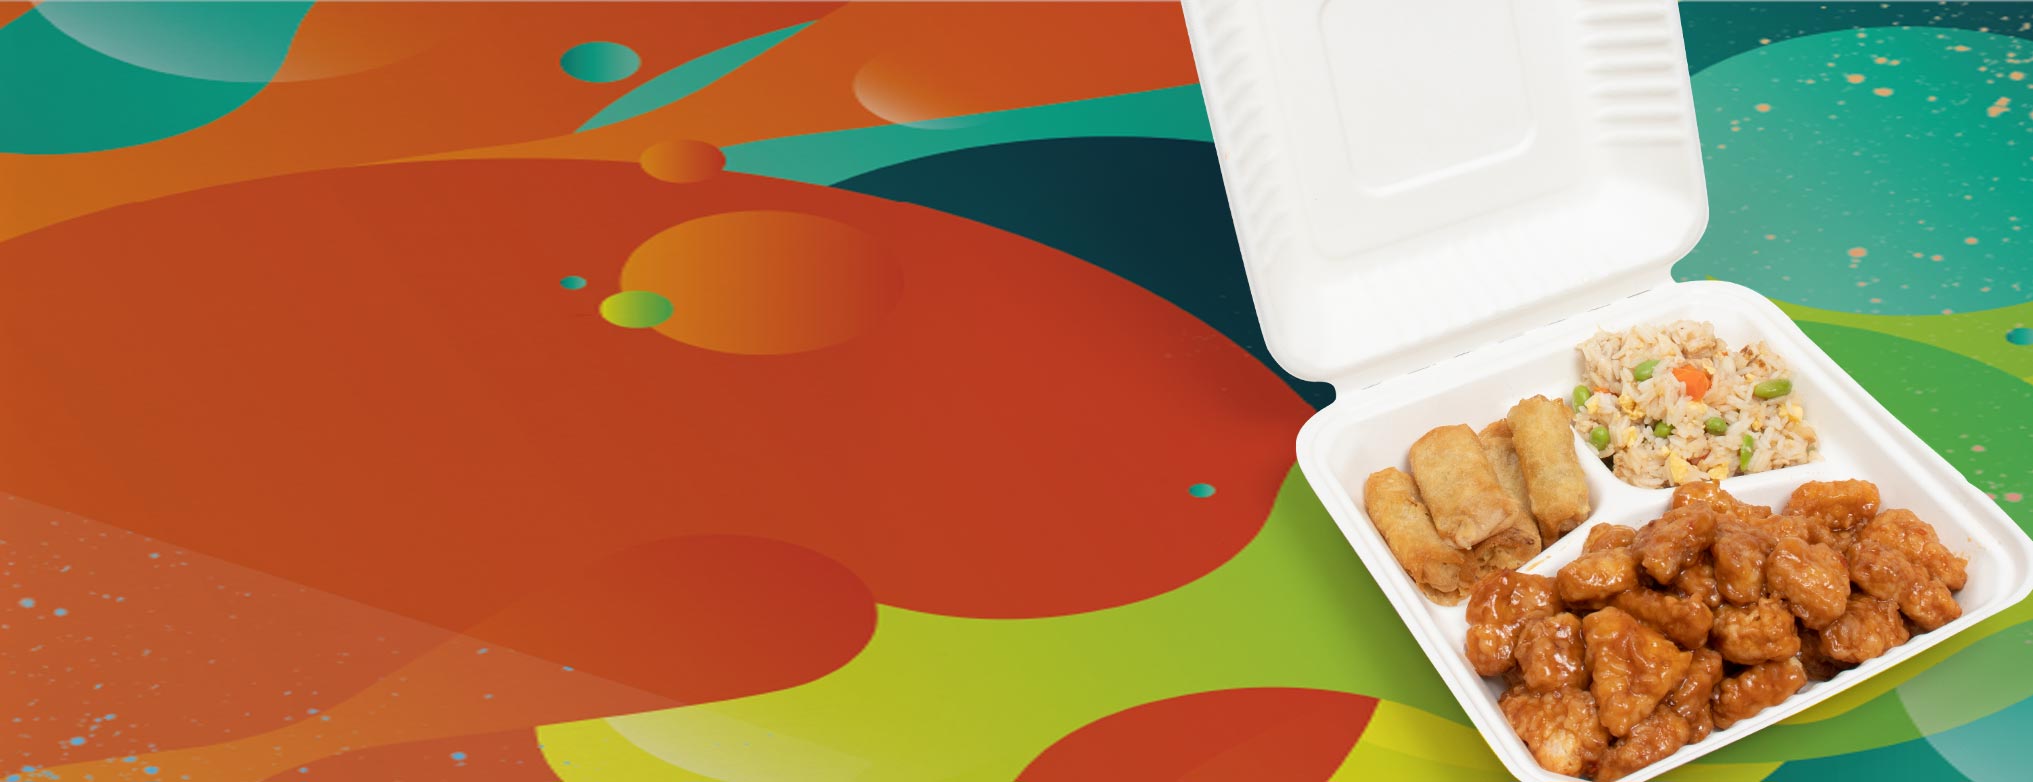 Bagasse Compostable Takeout Boxes